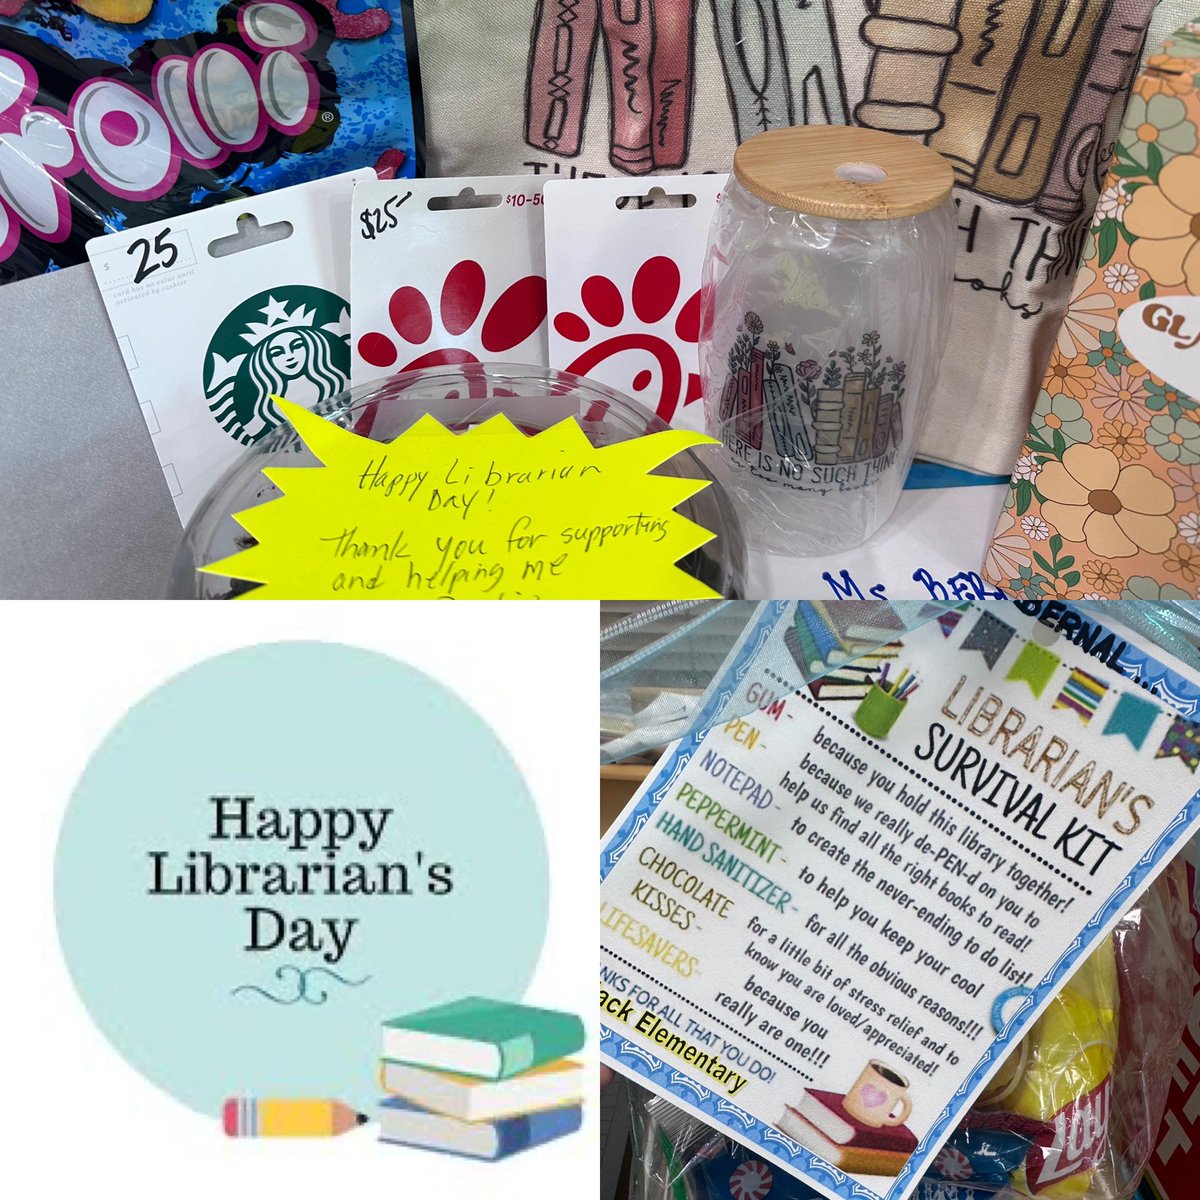 So thankful for all the love on School Librarian Appreciation Day!!! I am truly bless and extremely thankful!! @BlackES_AISD